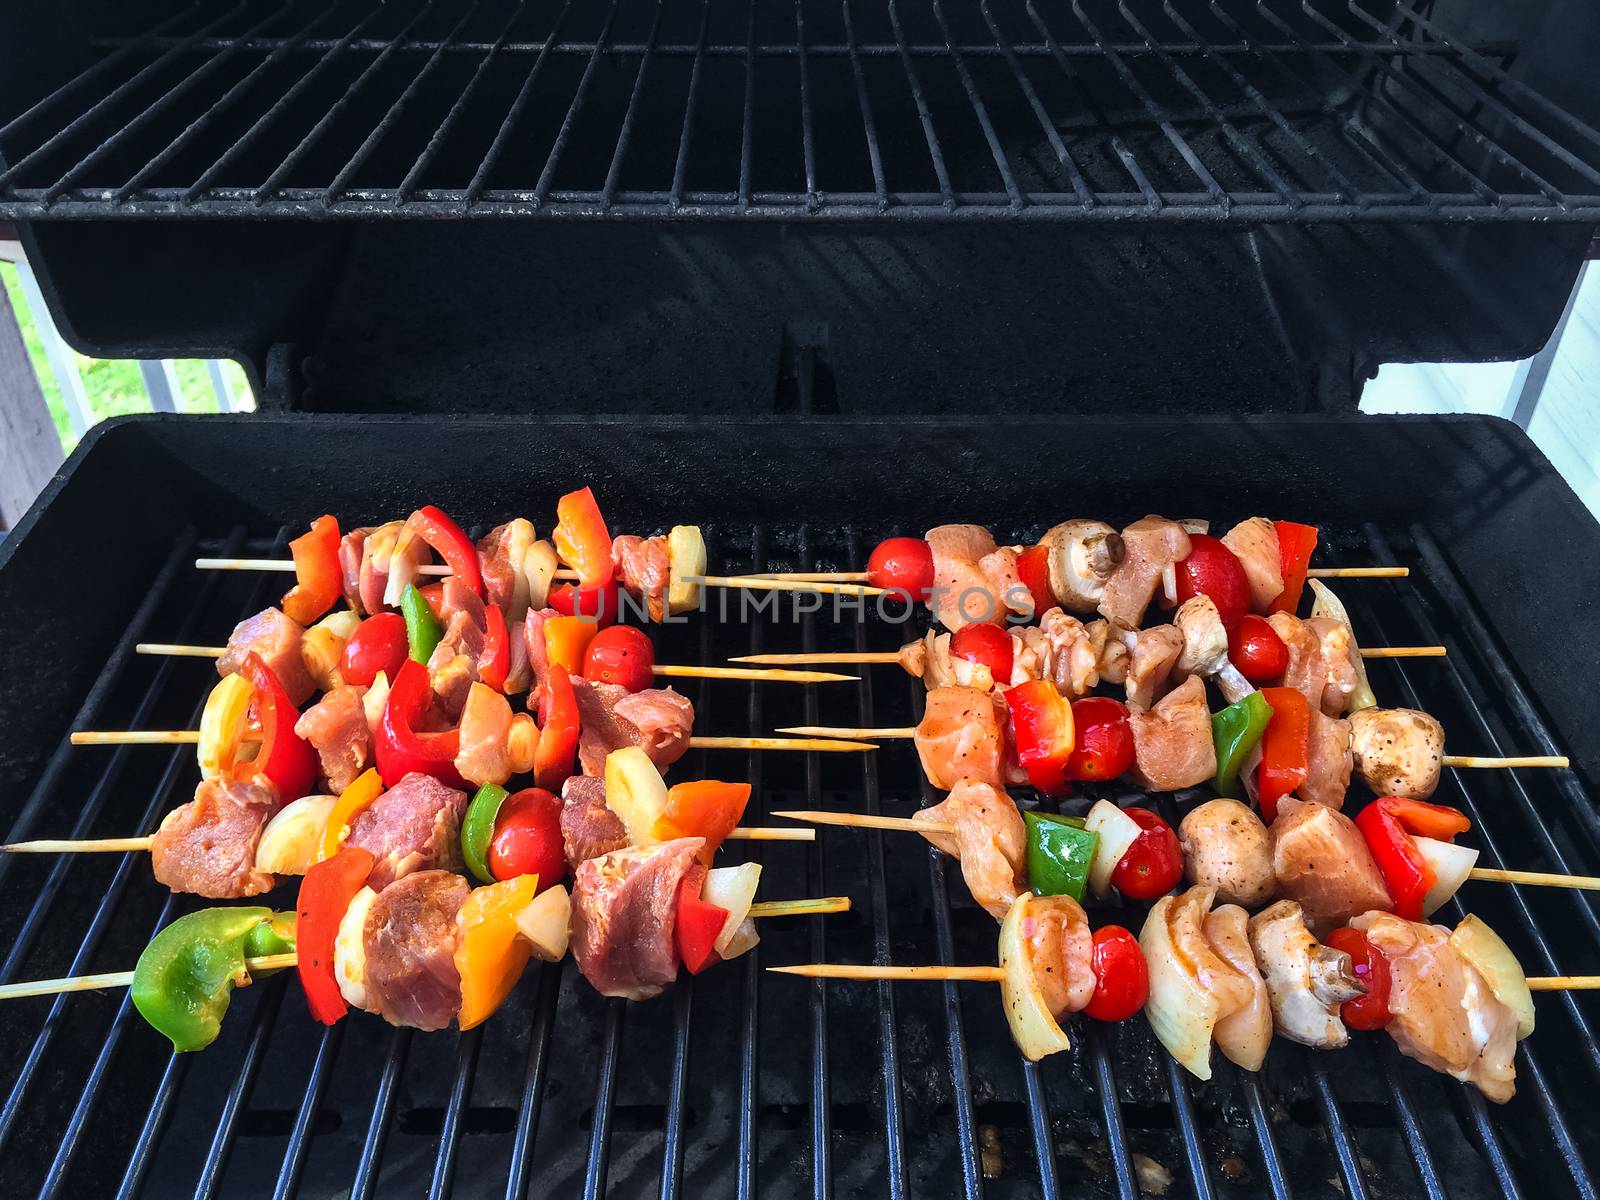 Meat and vegetable skewers on a barbecue grill. Summer bbq.